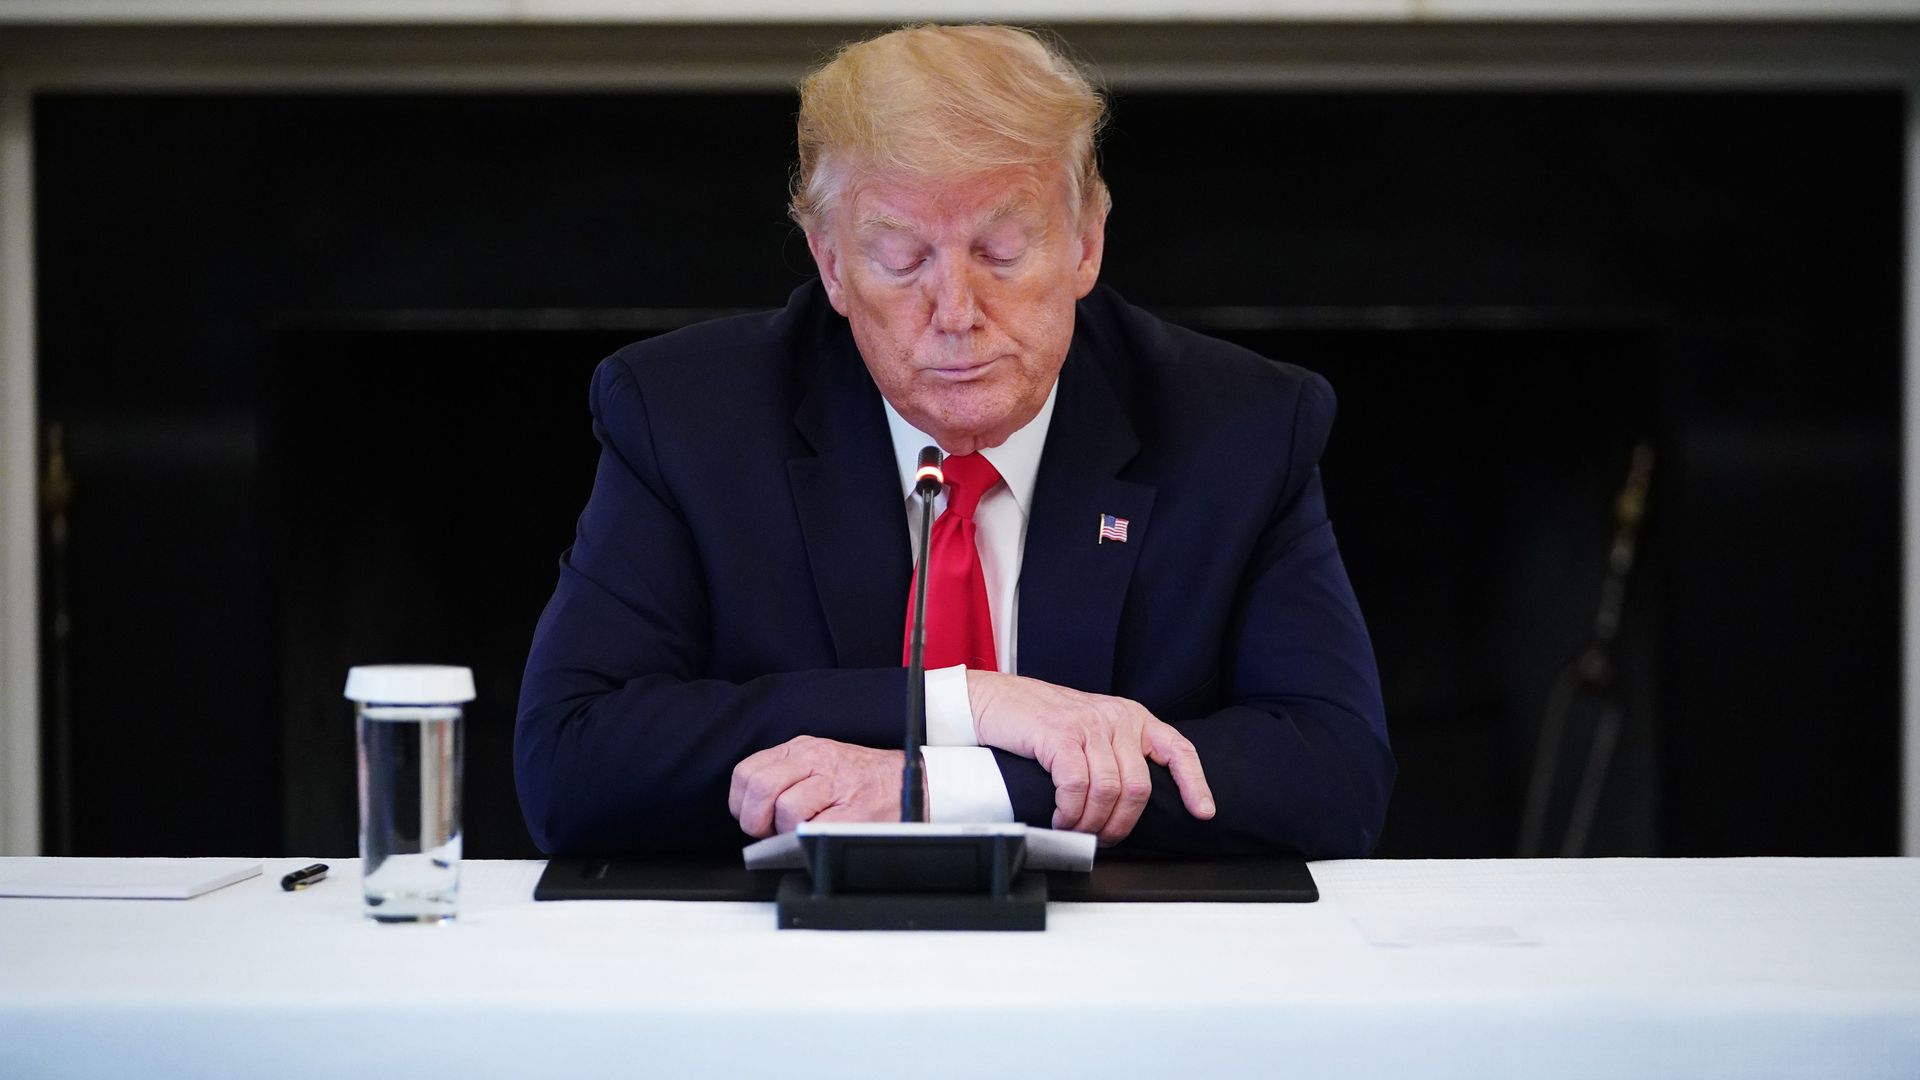 In this image, Trump sits at a table